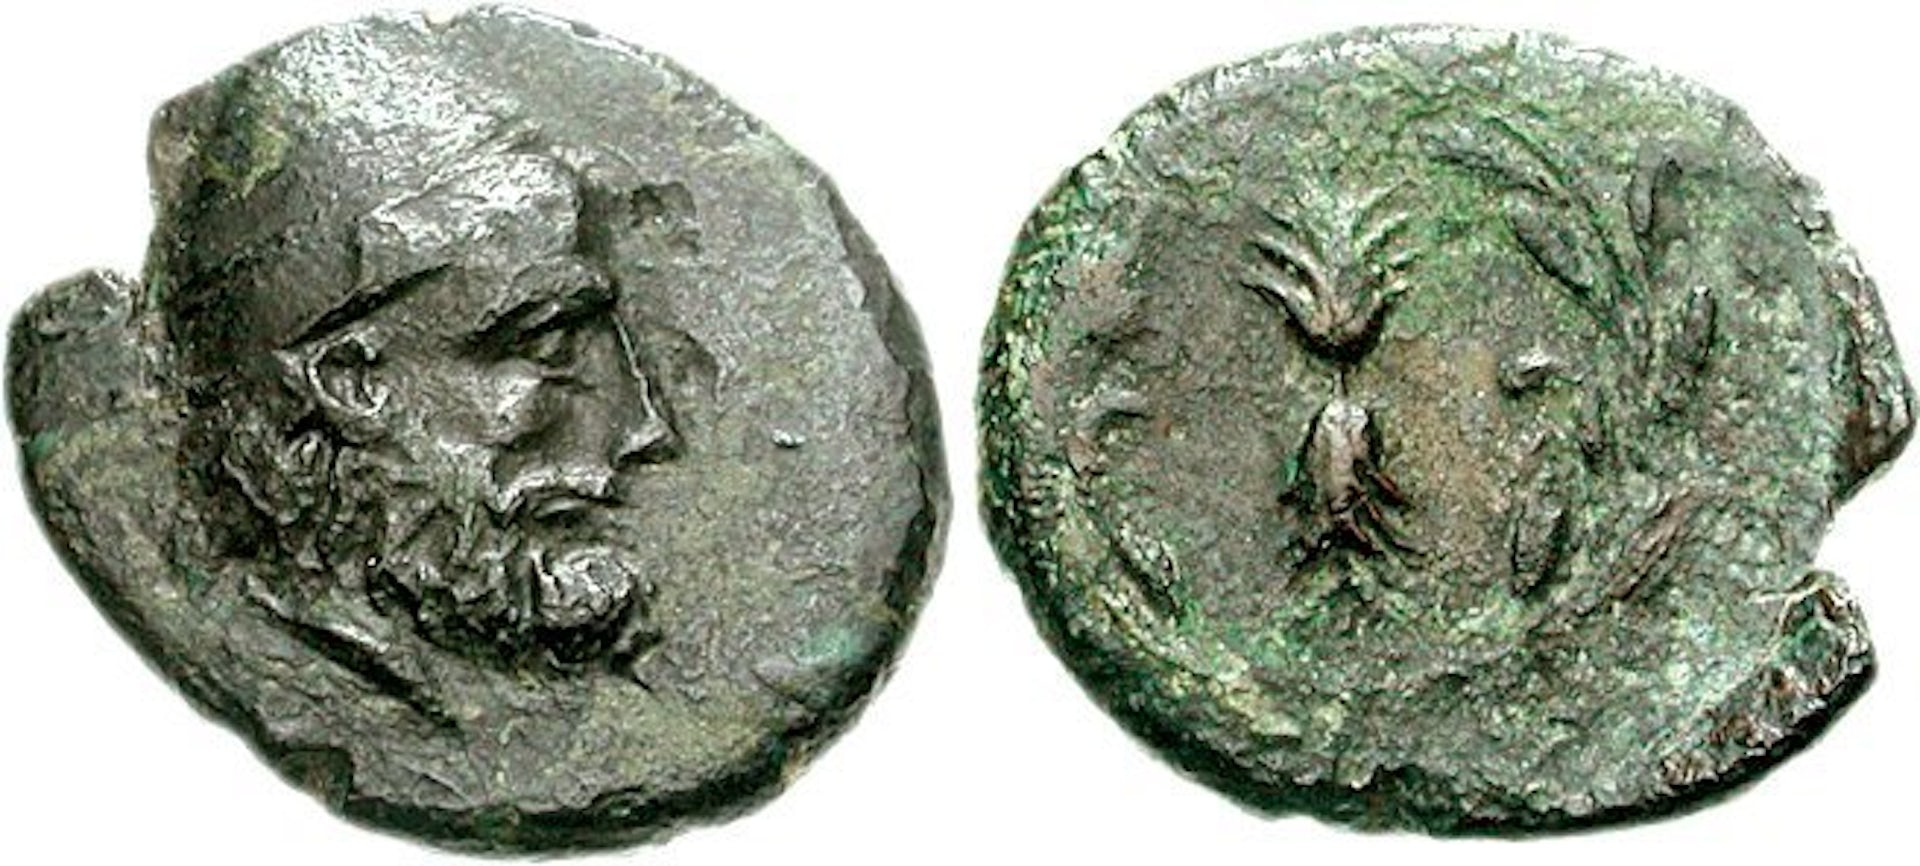 Coin from Ithaca with Odysseus